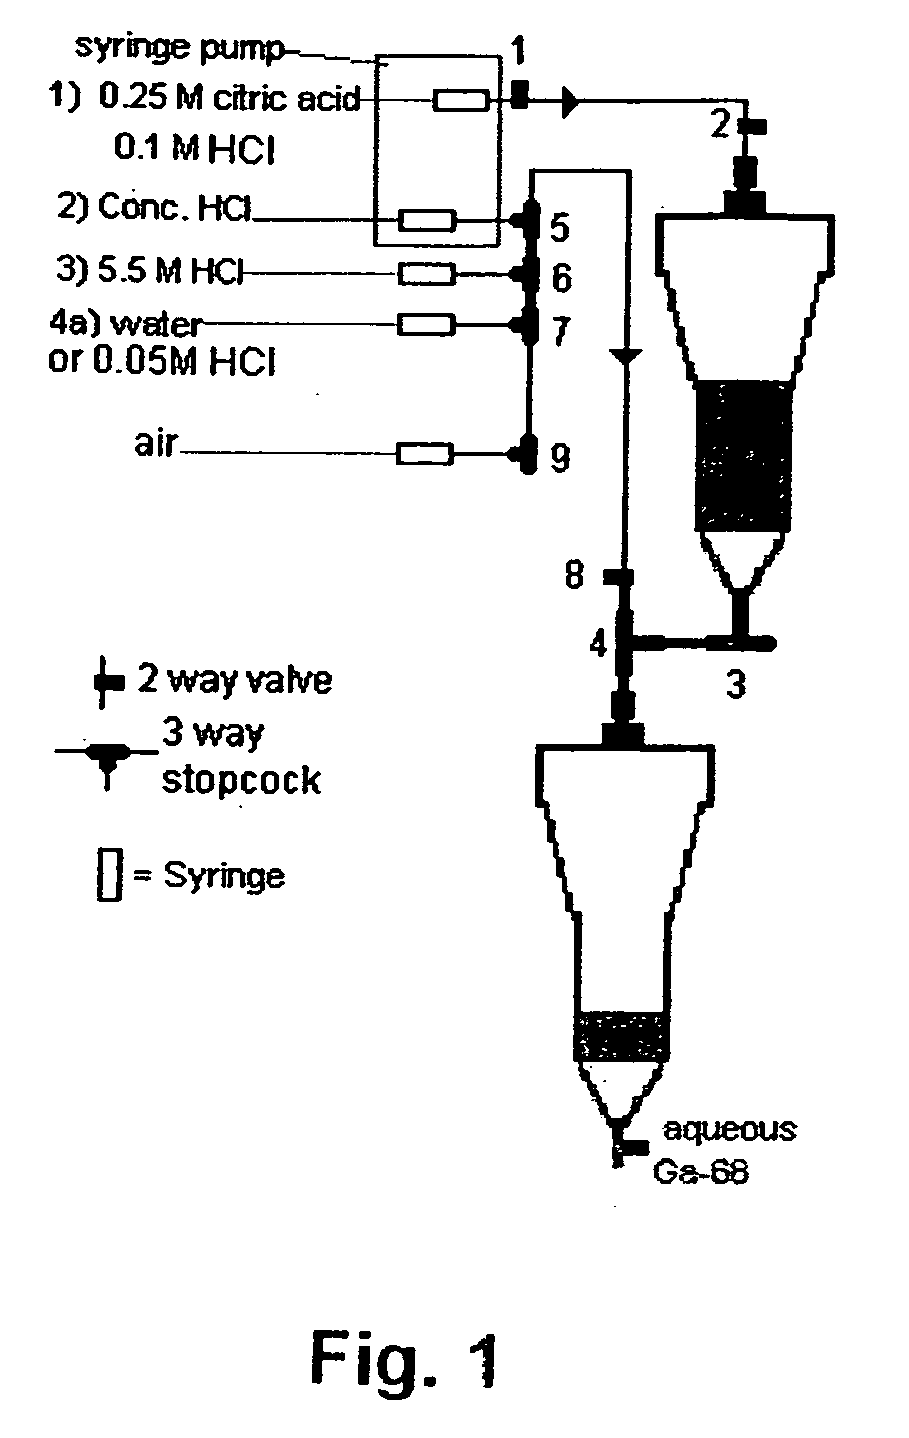 Method for the chemical separation of GE-68 from its daughter Ga-68